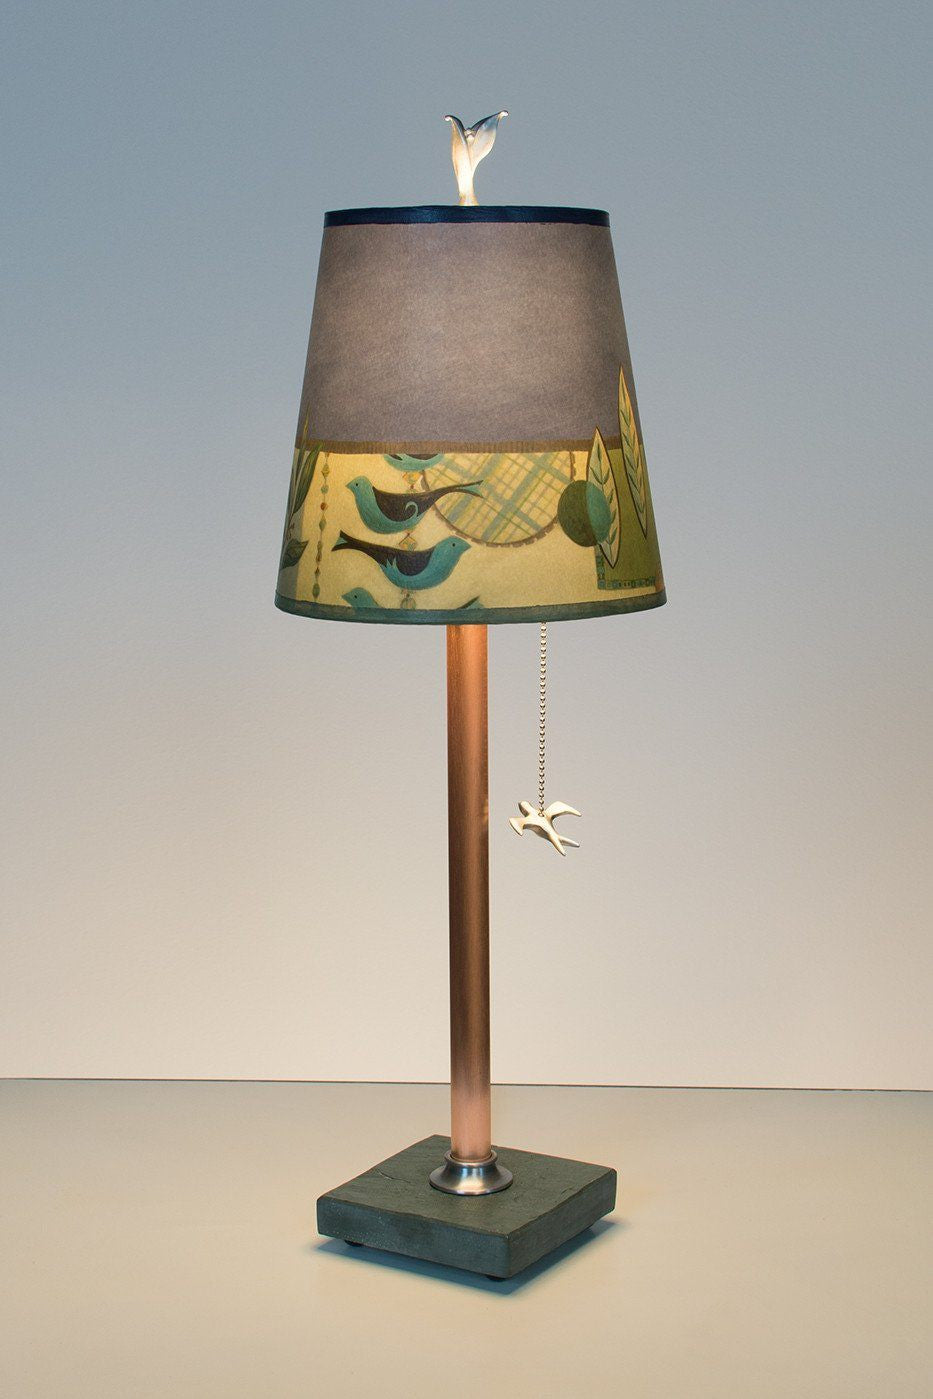 Janna Ugone &amp; Co Table Lamps Copper Table Lamp with Small Drum Shade in New Capri Periwinkle